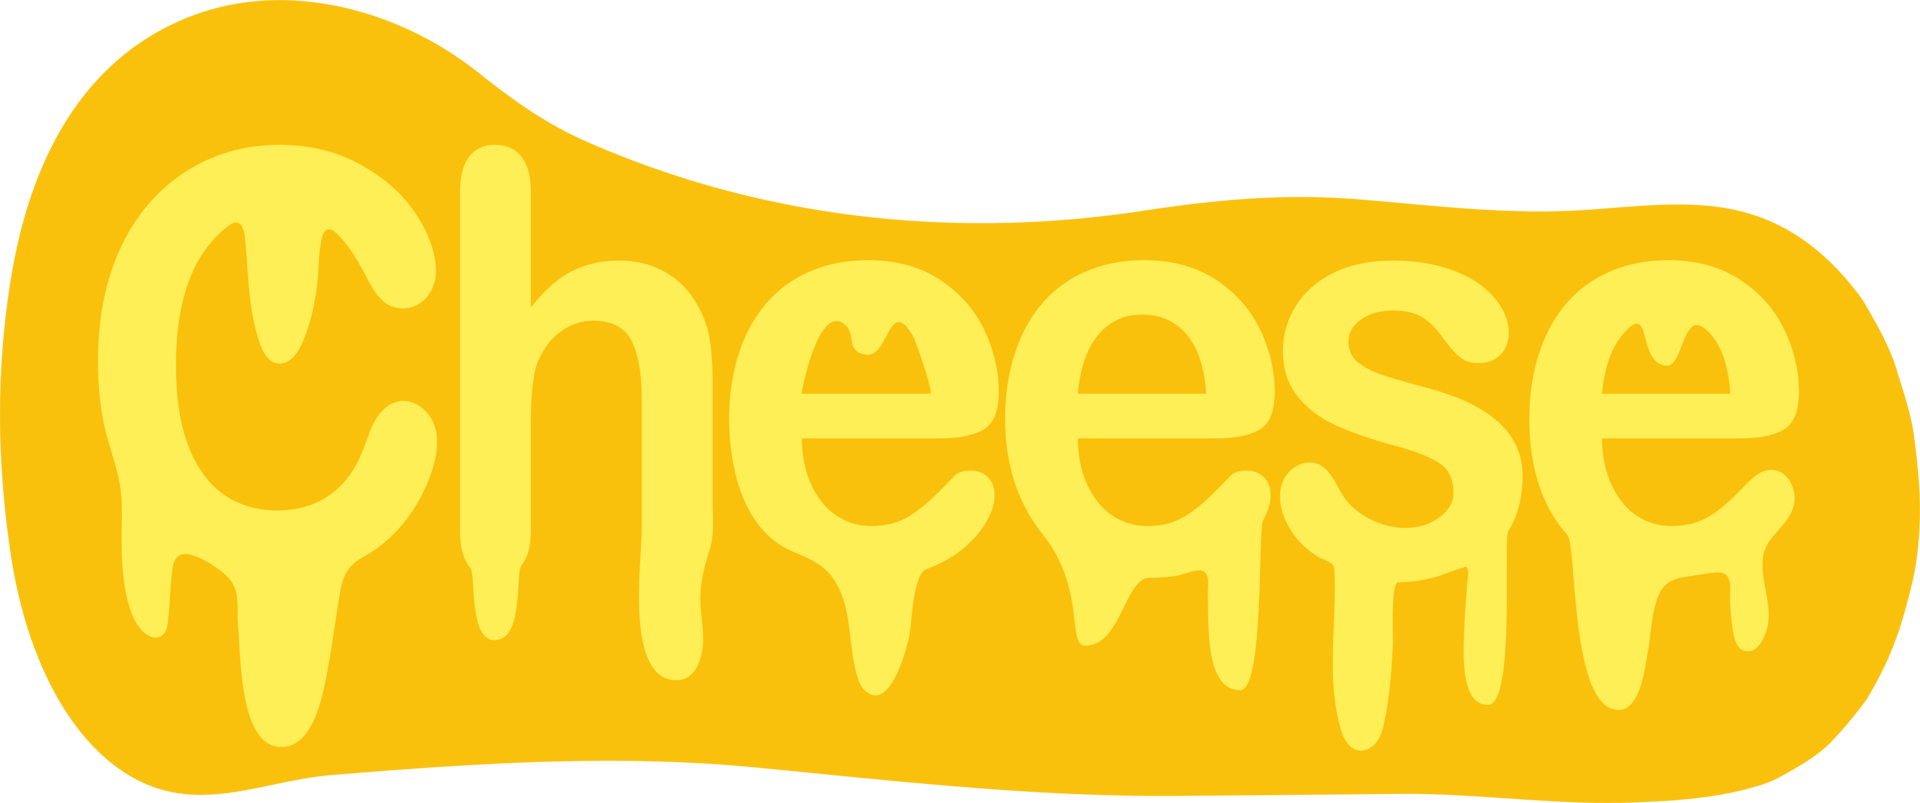 Melting Cheese Letter png